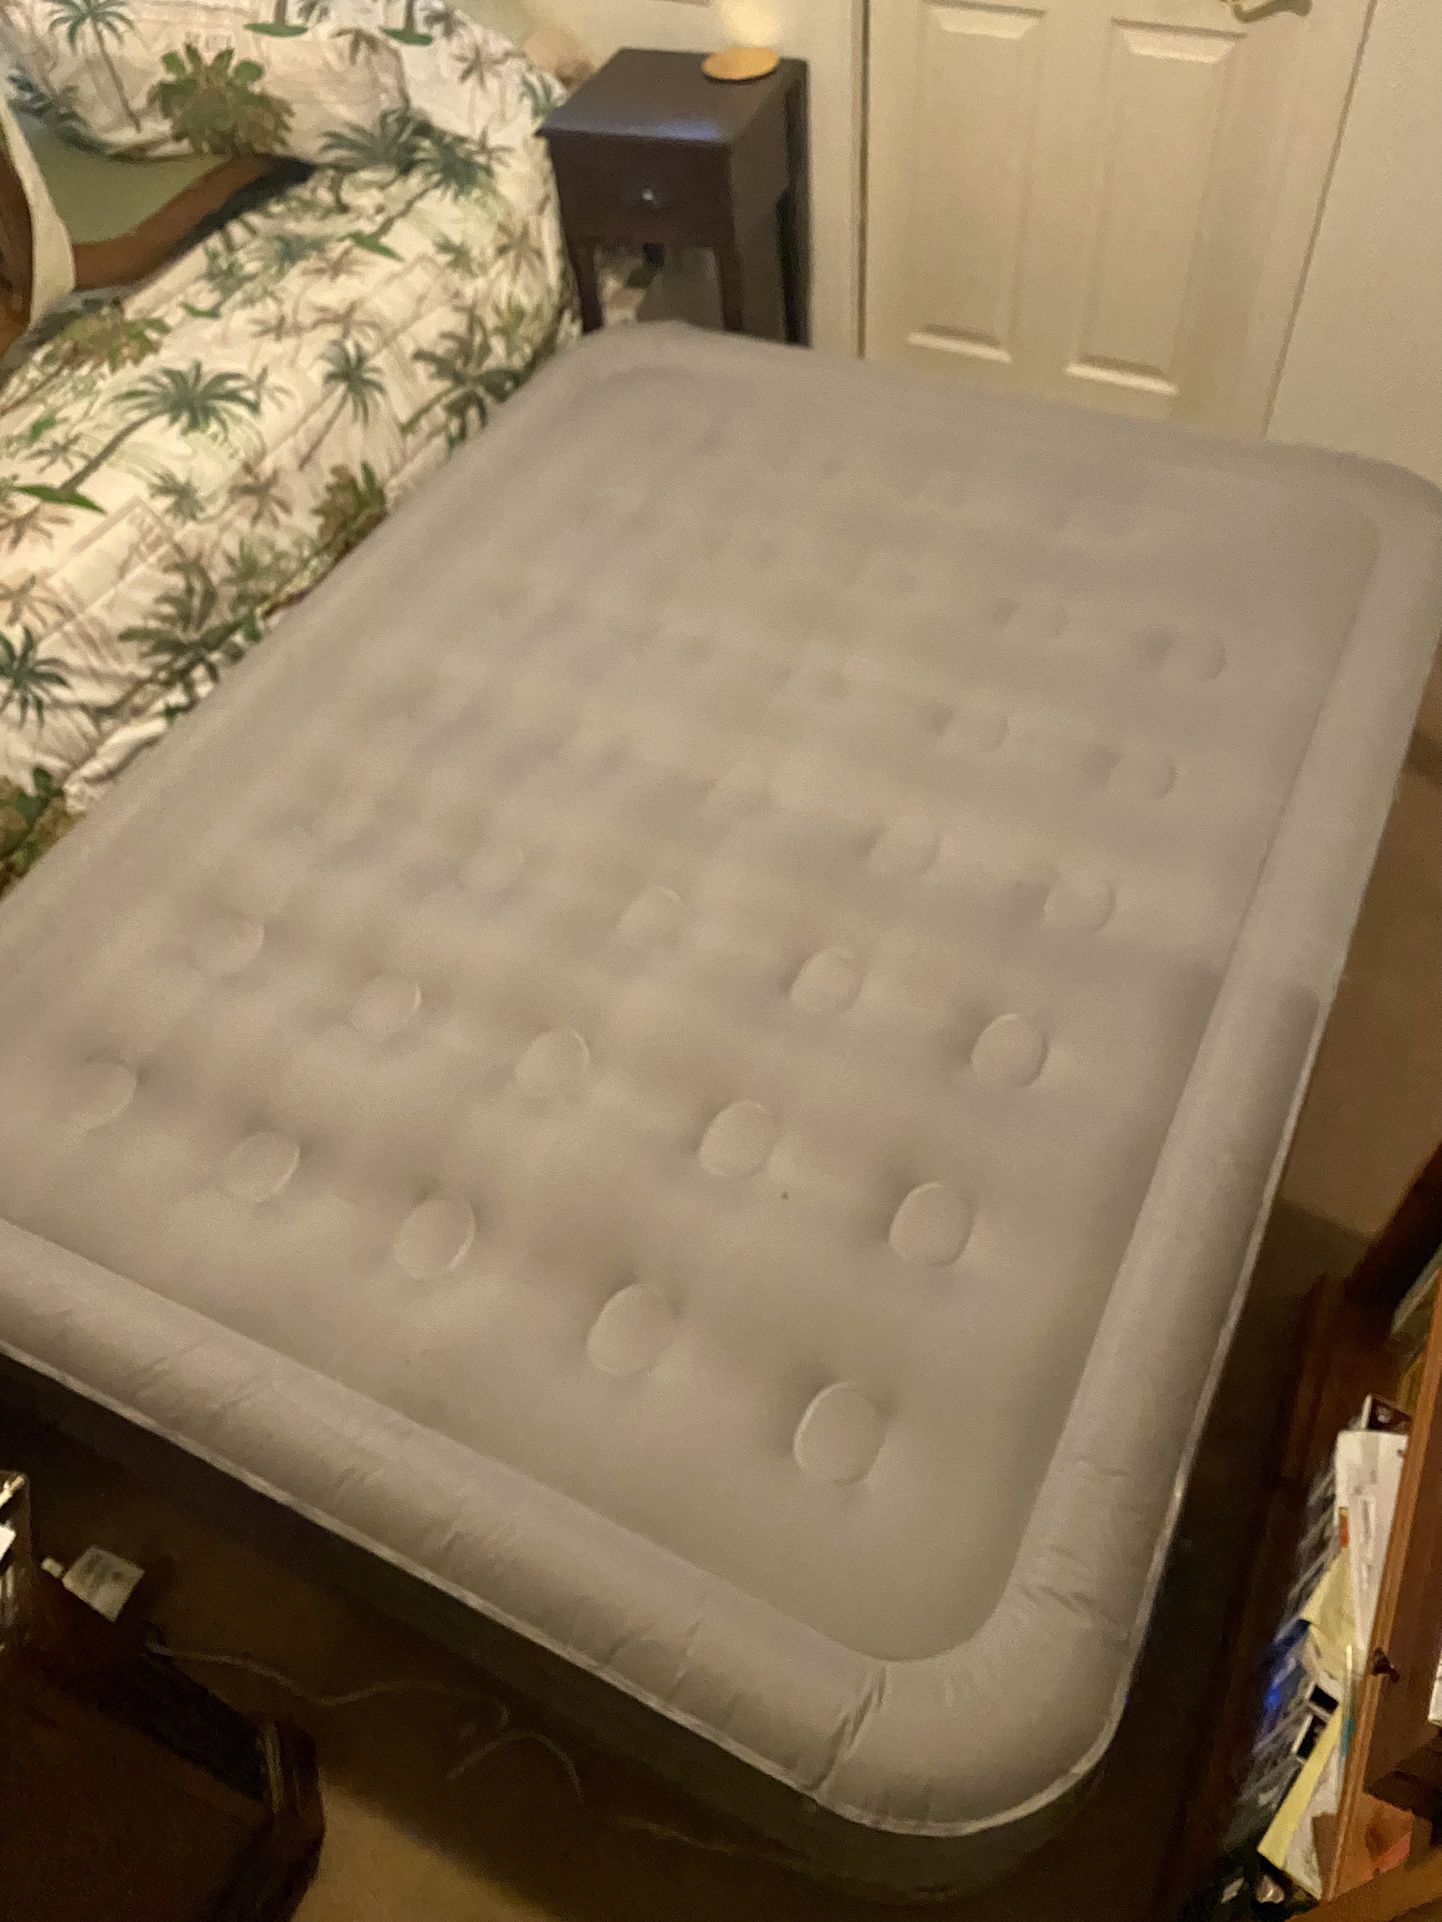 AreoBed AIRBED Inflatable Mattress, Queen. Used once.